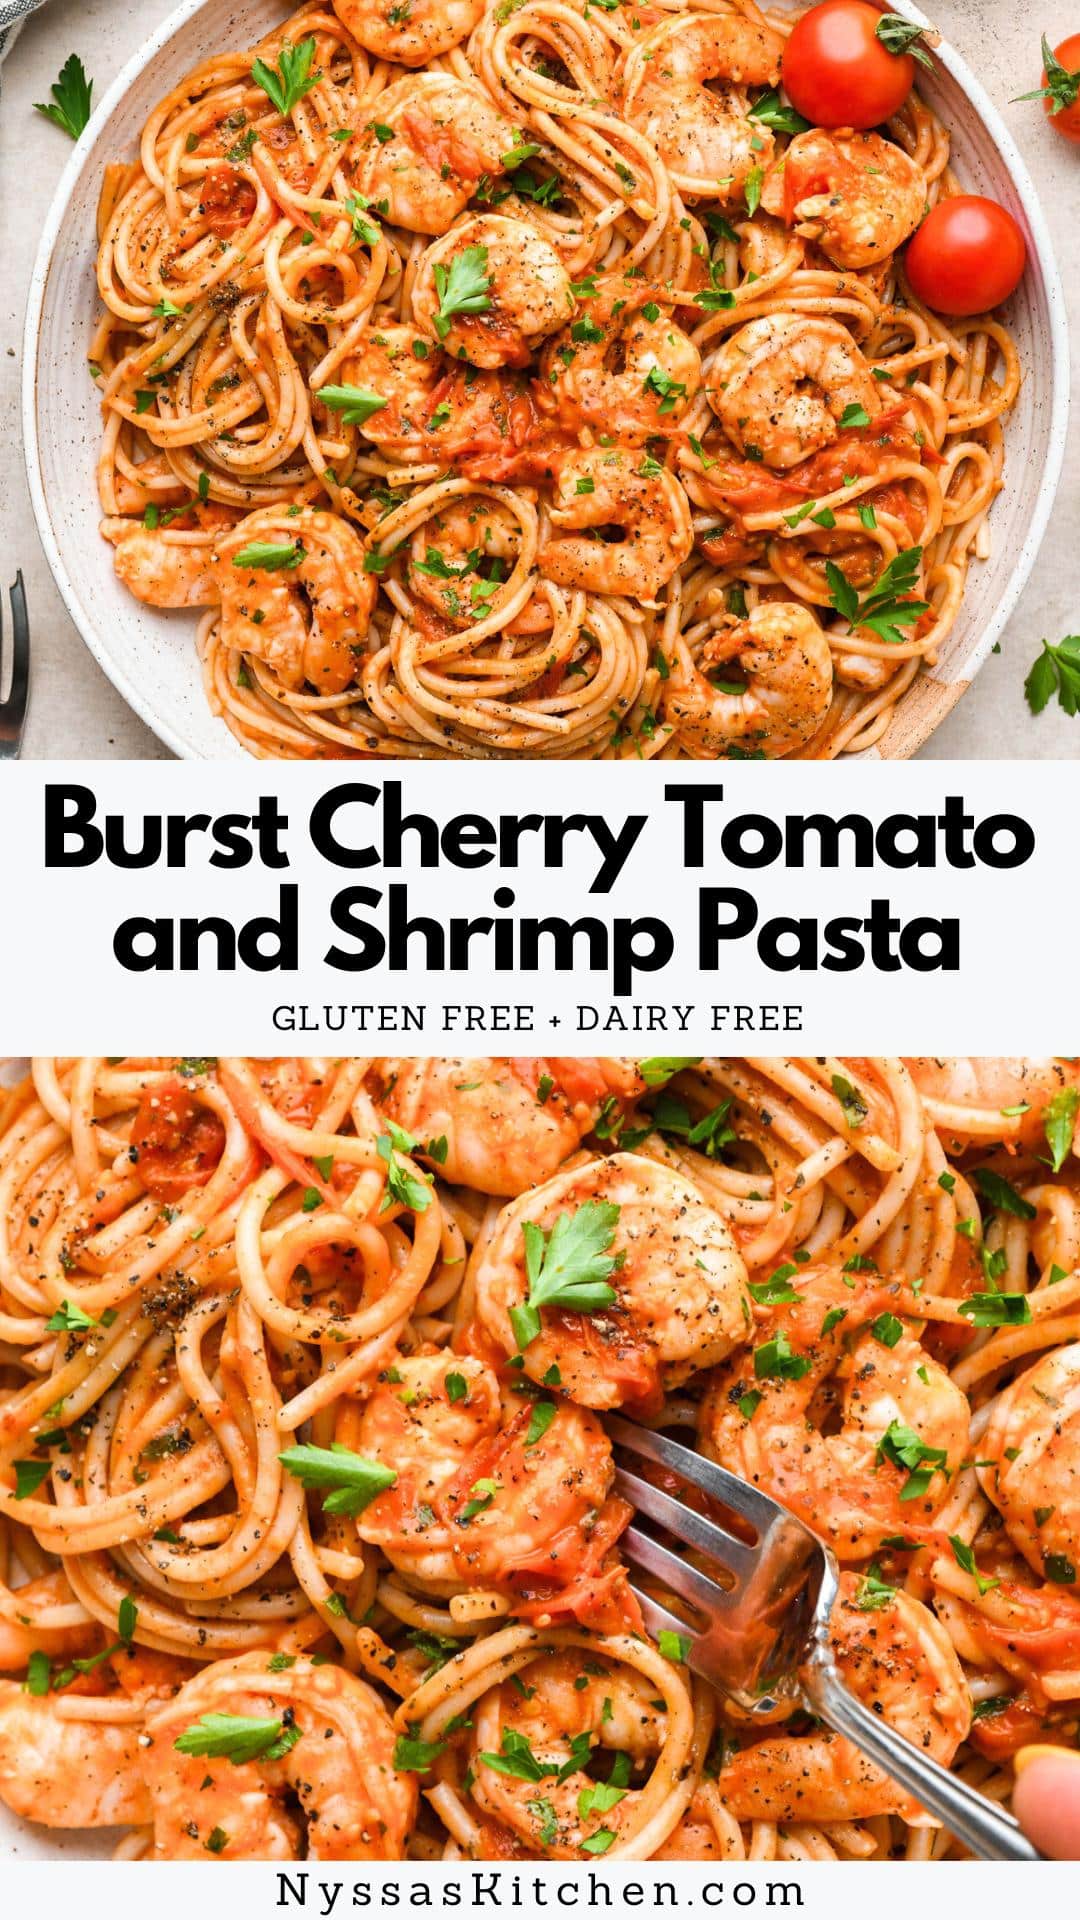 This simple burst cherry tomato and shrimp pasta is so simple but so incredibly flavorful! Made with fresh cherry tomatoes, lots of garlic, and a little bit of tomato paste to bolster the tomato flavor, it is made without cream and dairy free. We opt for GF pasta to keep the recipe gluten free, but any pasta you like will work! It is all cooked in one skillet and ready in just 30 minutes. Adding chopped parsley brings some color and elegance to the dish, making it just as perfect for serving guests as it is for a quick weeknight dinner.